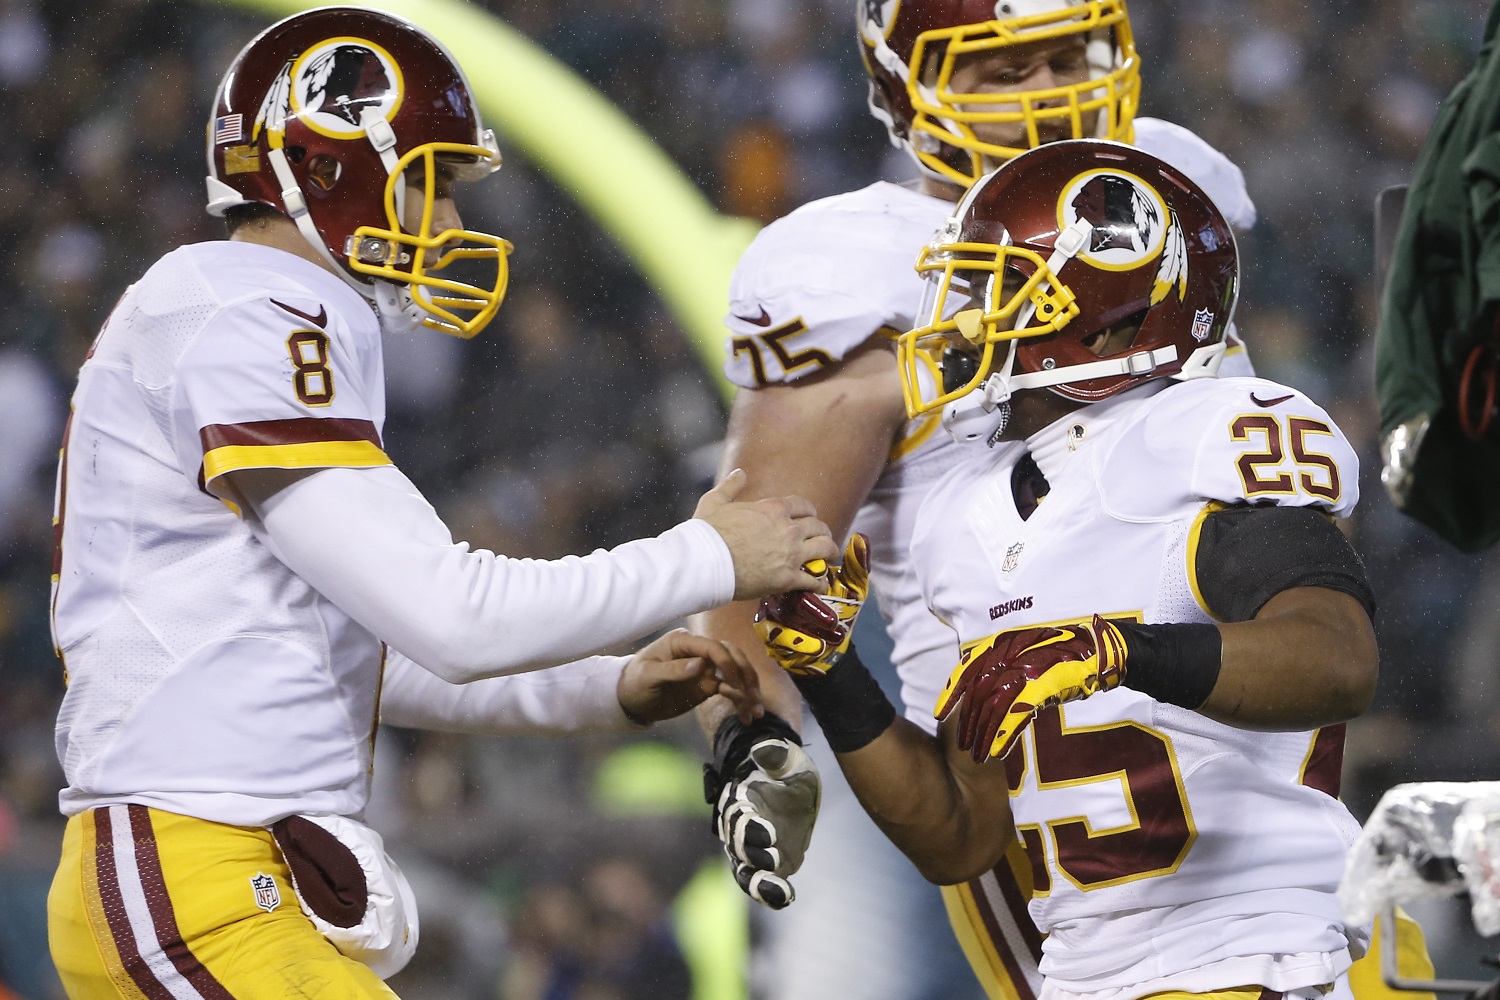 Washington Redskins' Kirk Cousins (8) and Chris Thompson (25) celebrate after Thompson's touchdown in the second half of an NFL football game against the Philadelphia Eagles, Saturday, Dec. 26, 2015, in Philadelphia.  (AP Photo/Matt Rourke)